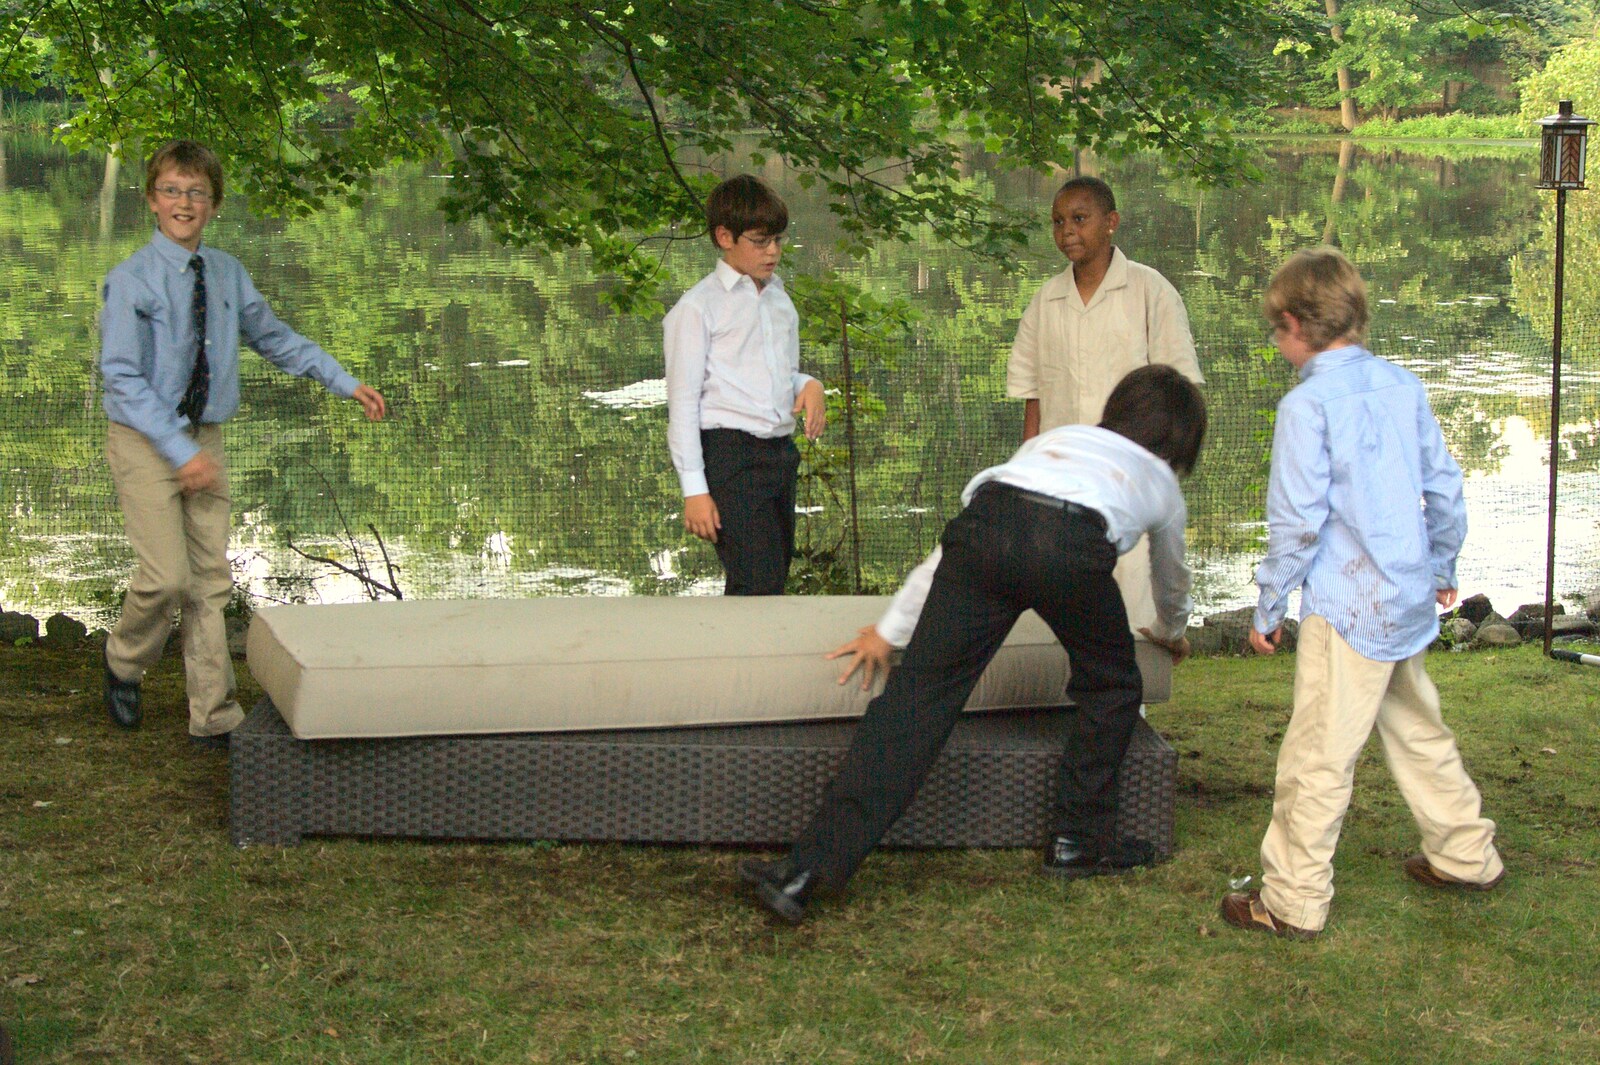 A pile of small boys mess around from Phil and Tania's Wedding, Short Hills, New Jersey, USA - 20th August 2011